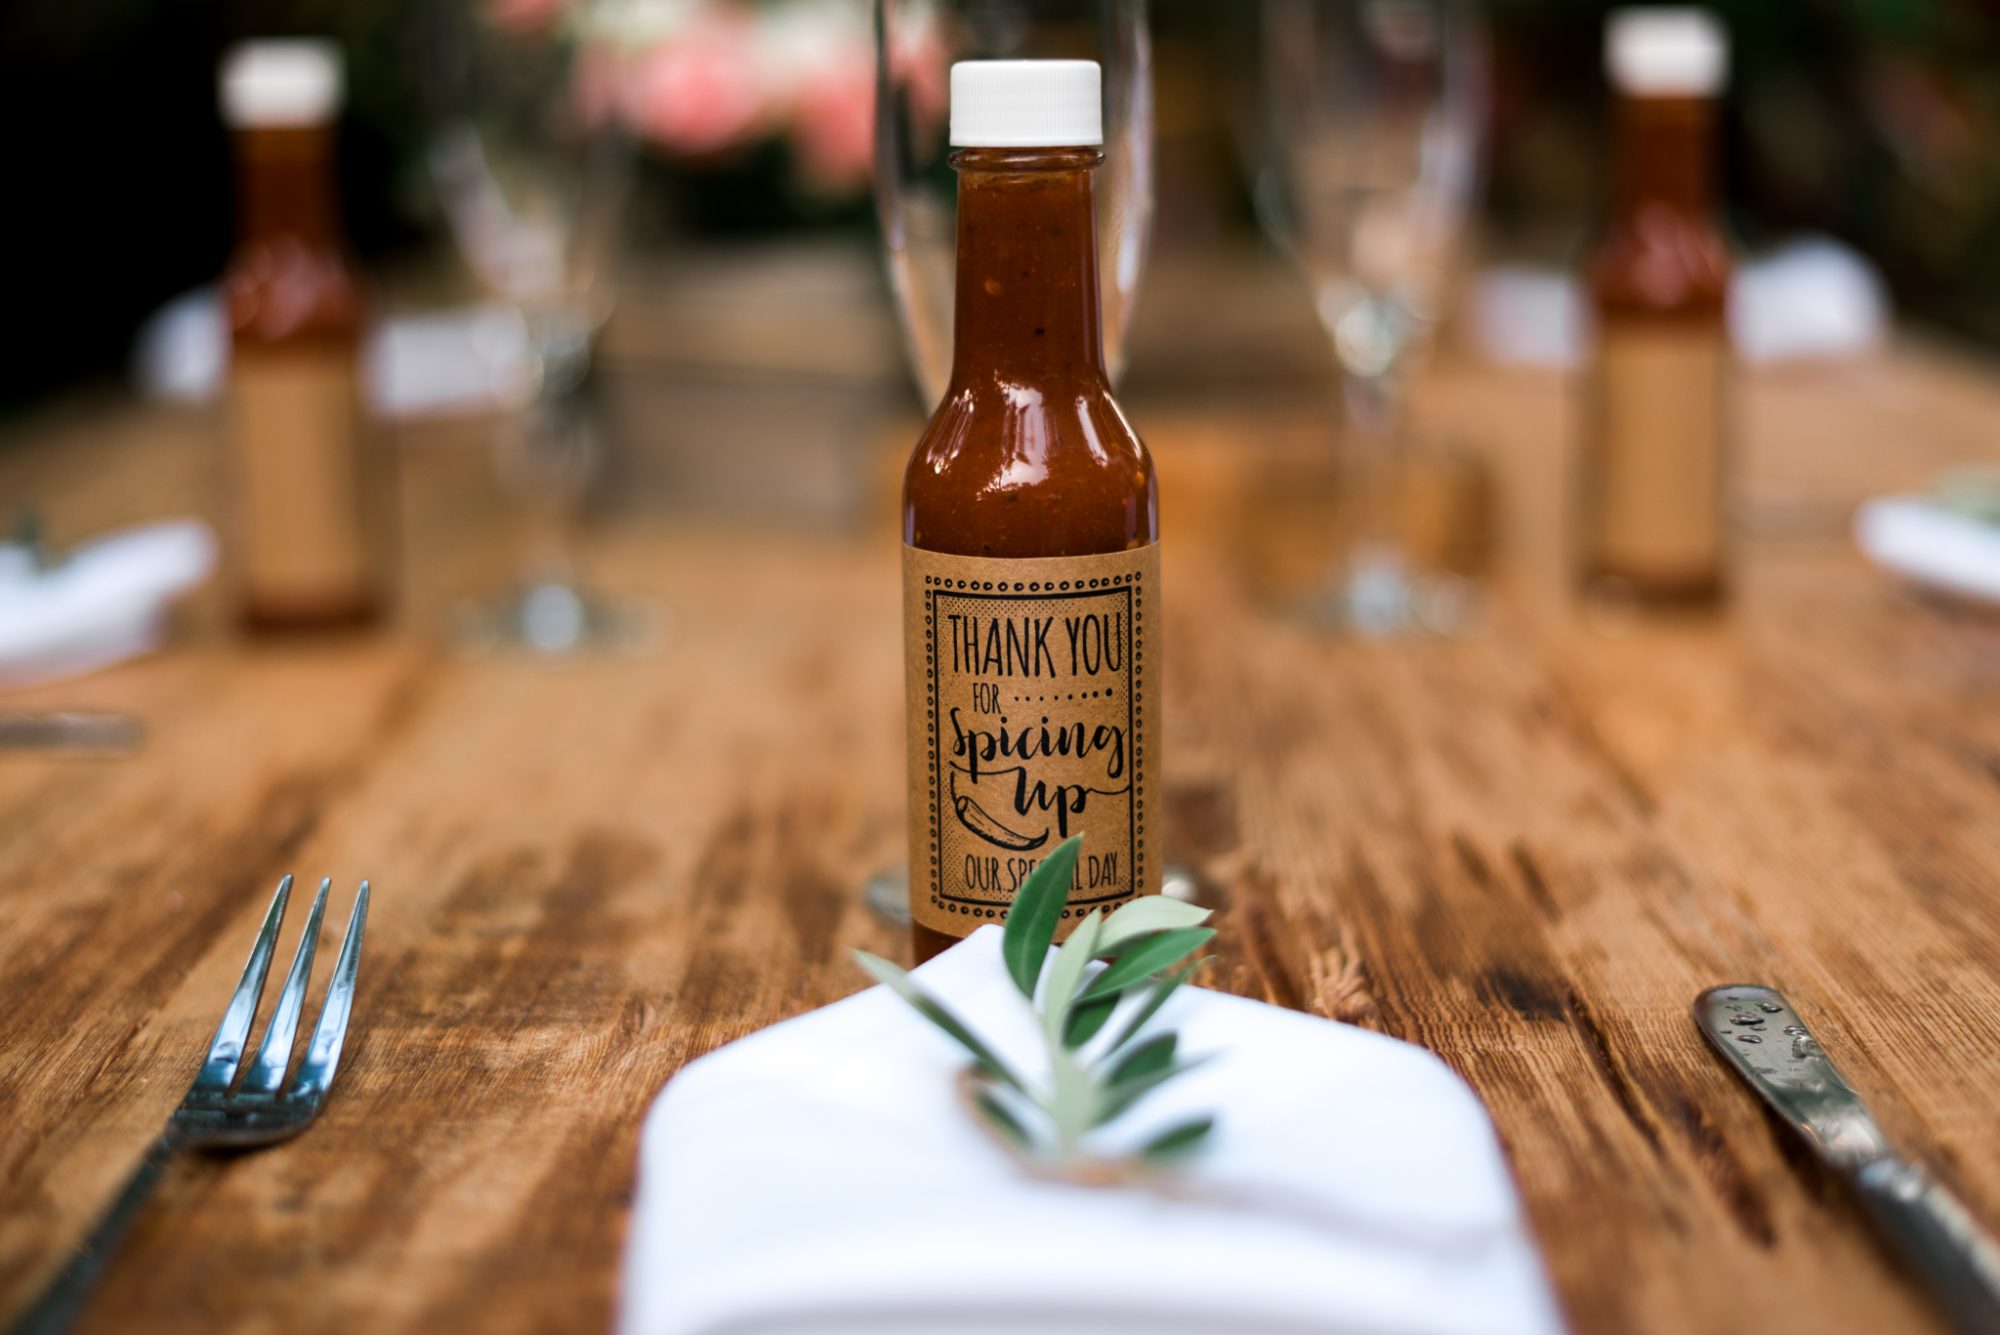 A bottle of hot sauce sits on a Key West wooden table.